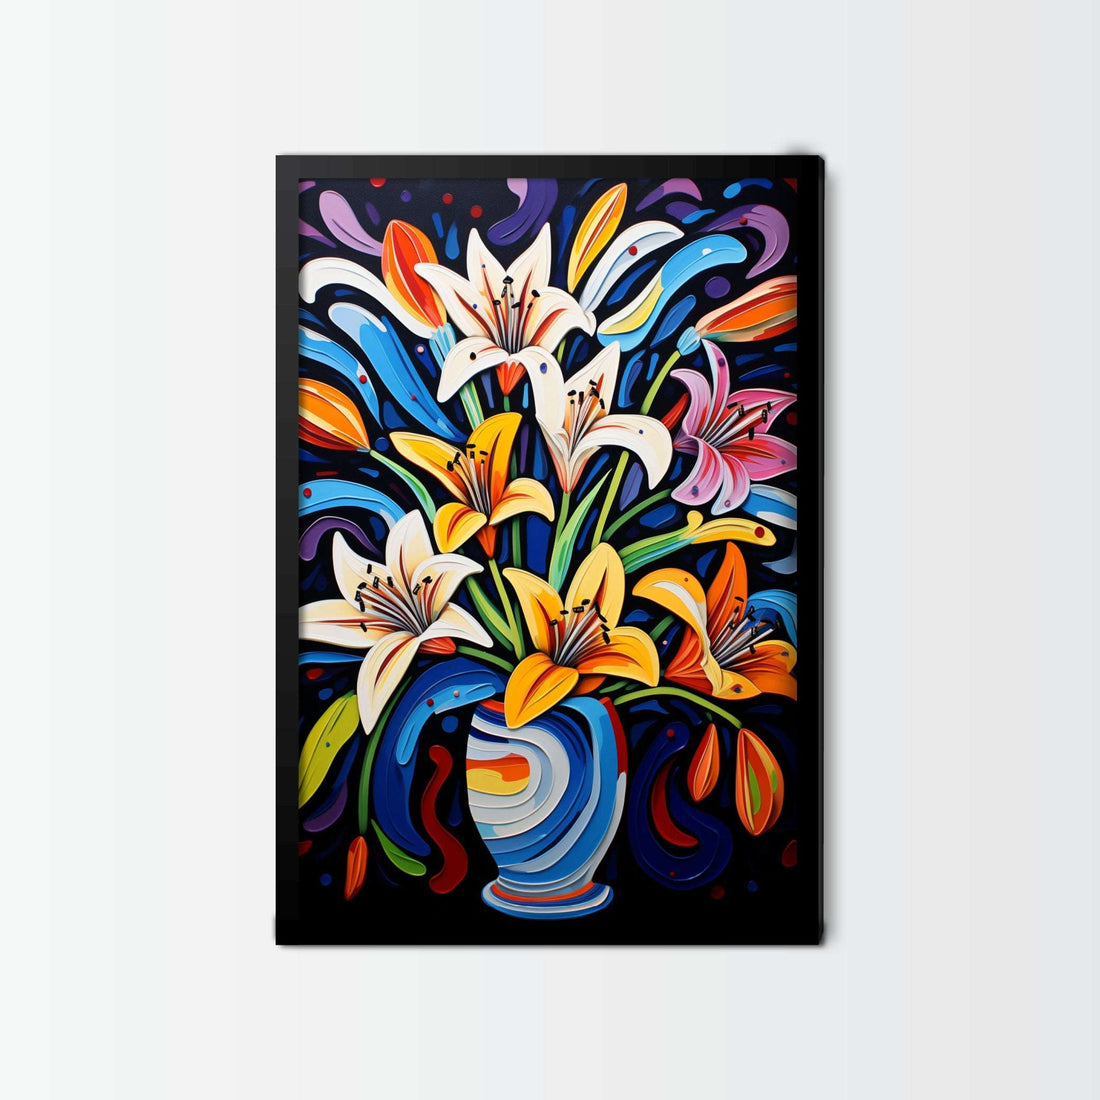 Poster Vivid Bouquet - Add sophistication to your home